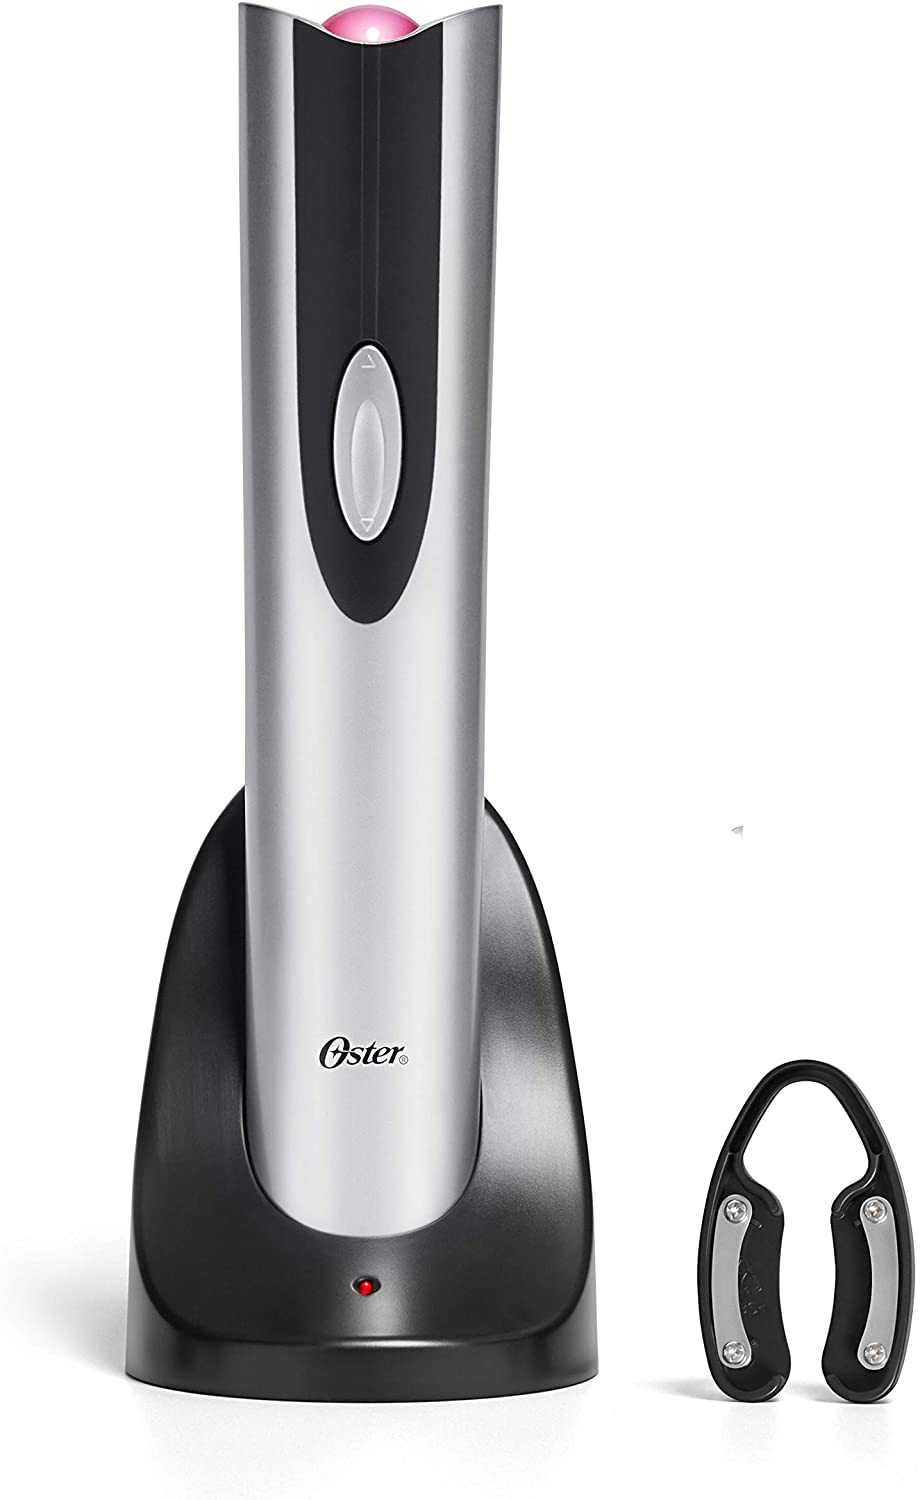 Oster Cordless Electric Wine Bottle Opener with Foil Cutter, FFP - FPSTBW8207-S-AMZ, Silver, One